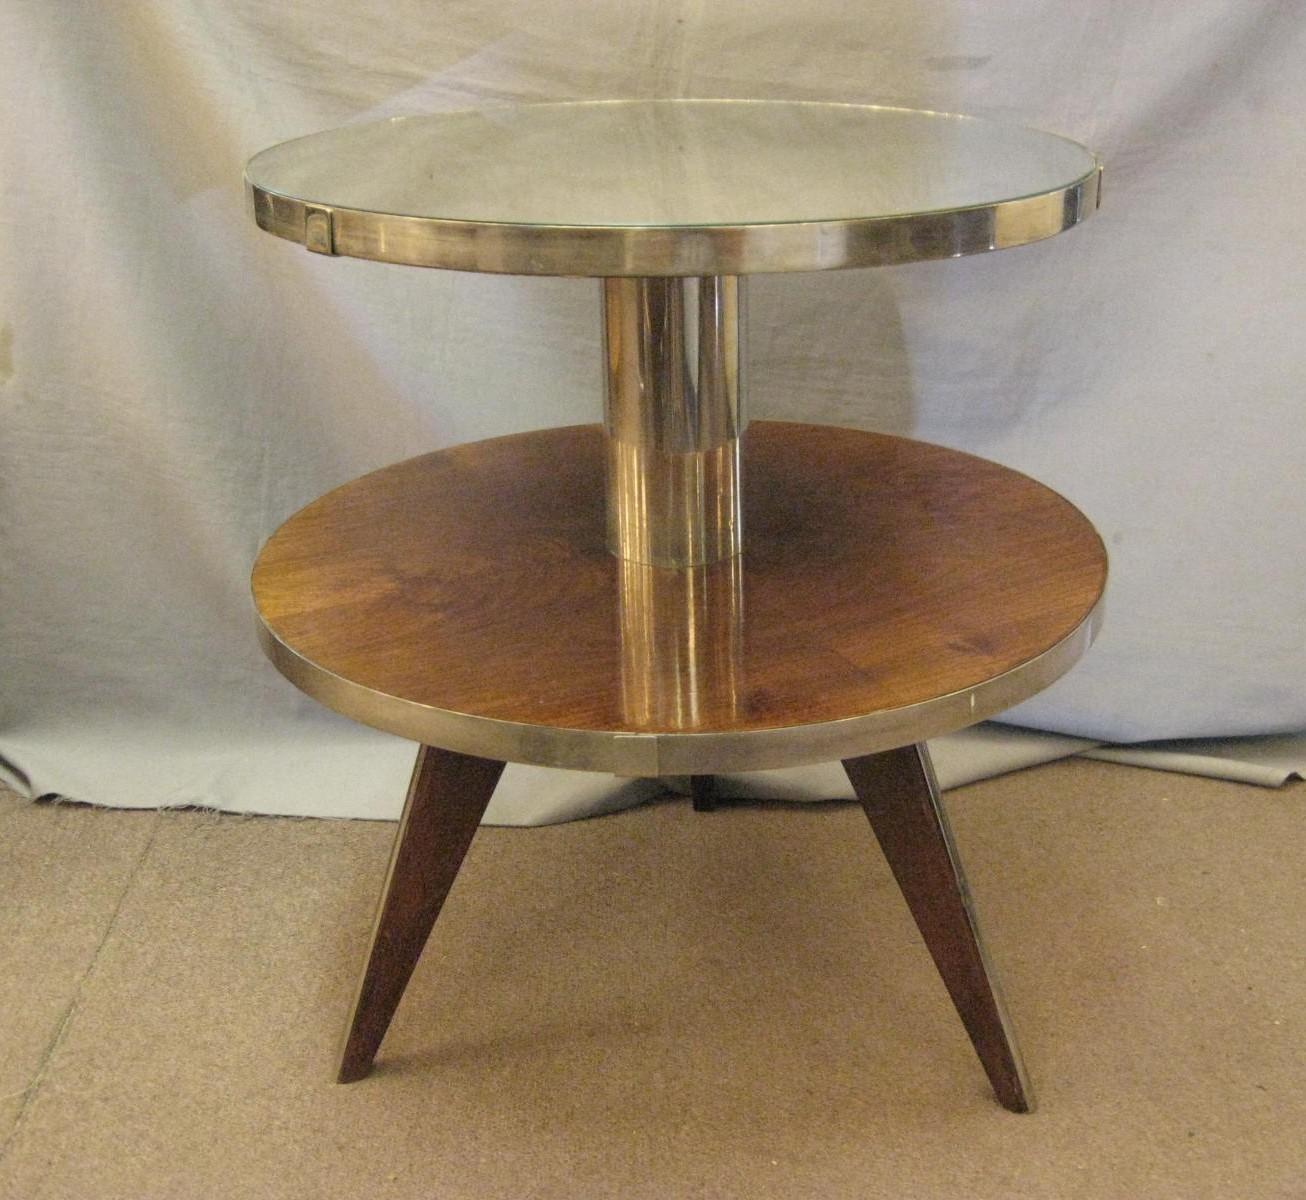 French Art Deco Occasional Table in Wood, Mirror, Nickel -Maurice Triboy For Sale 11